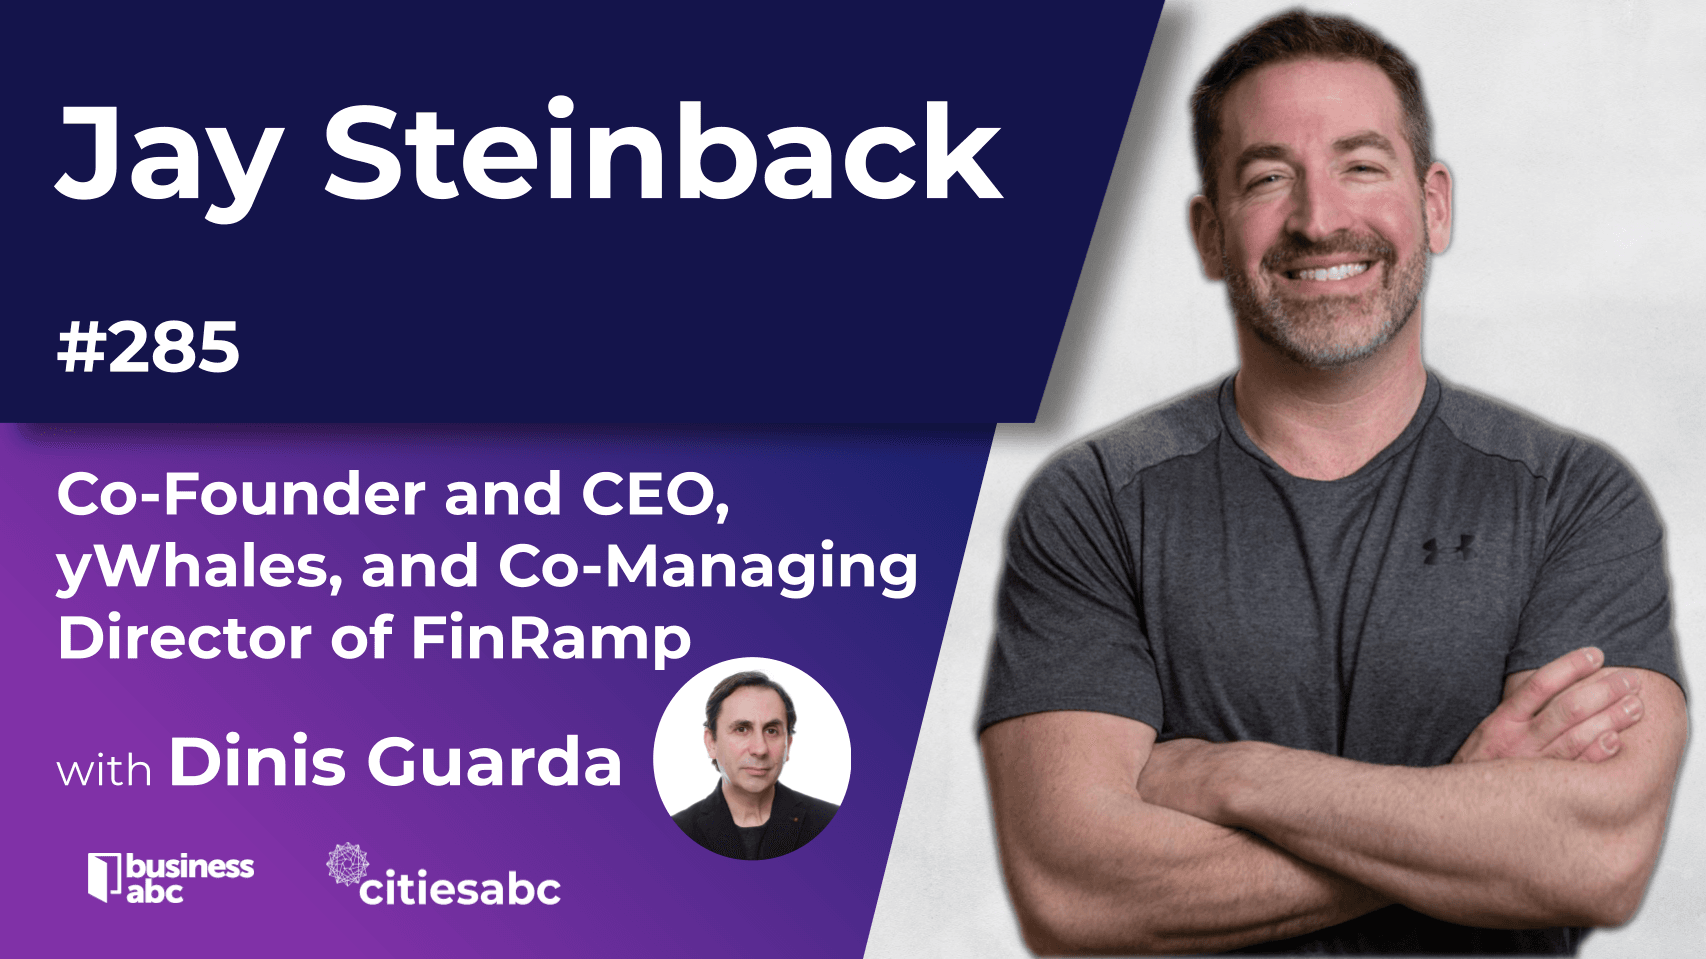 Jay Steinback, CEO yWhales, Talks Blockchain And Business Transition Into Web 3.0 In Dinis Guarda YouTube Podcast